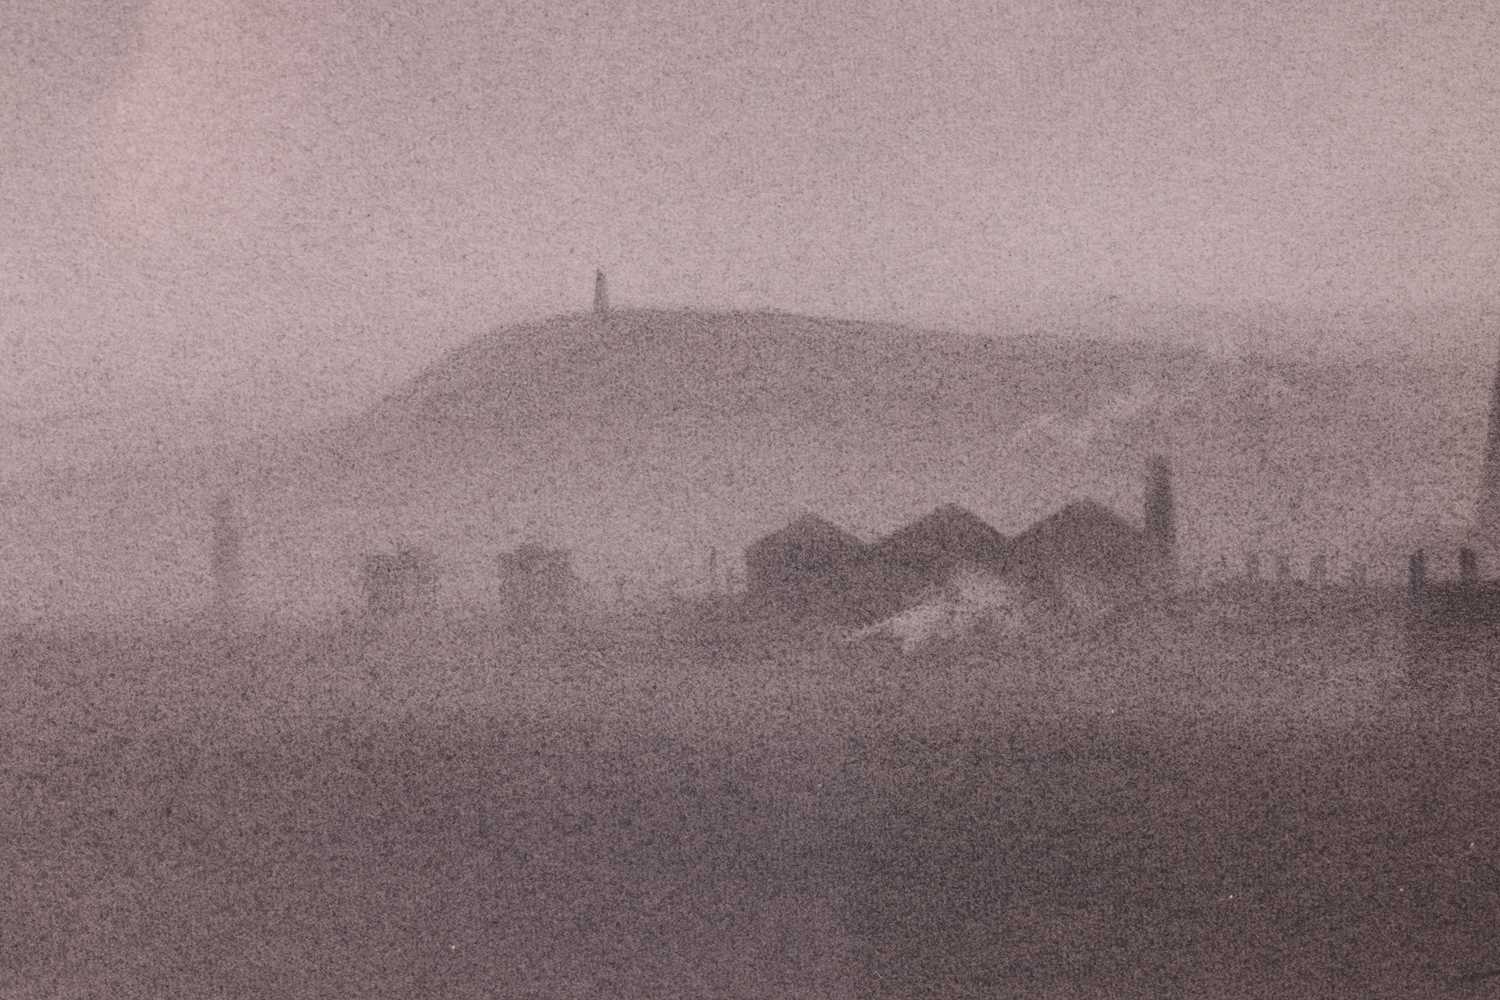 Trevor Grimshaw (1947 - 2001), Northern Industrial Scene, signed and dated 'T. Grimshaw '70' in penc - Image 3 of 12